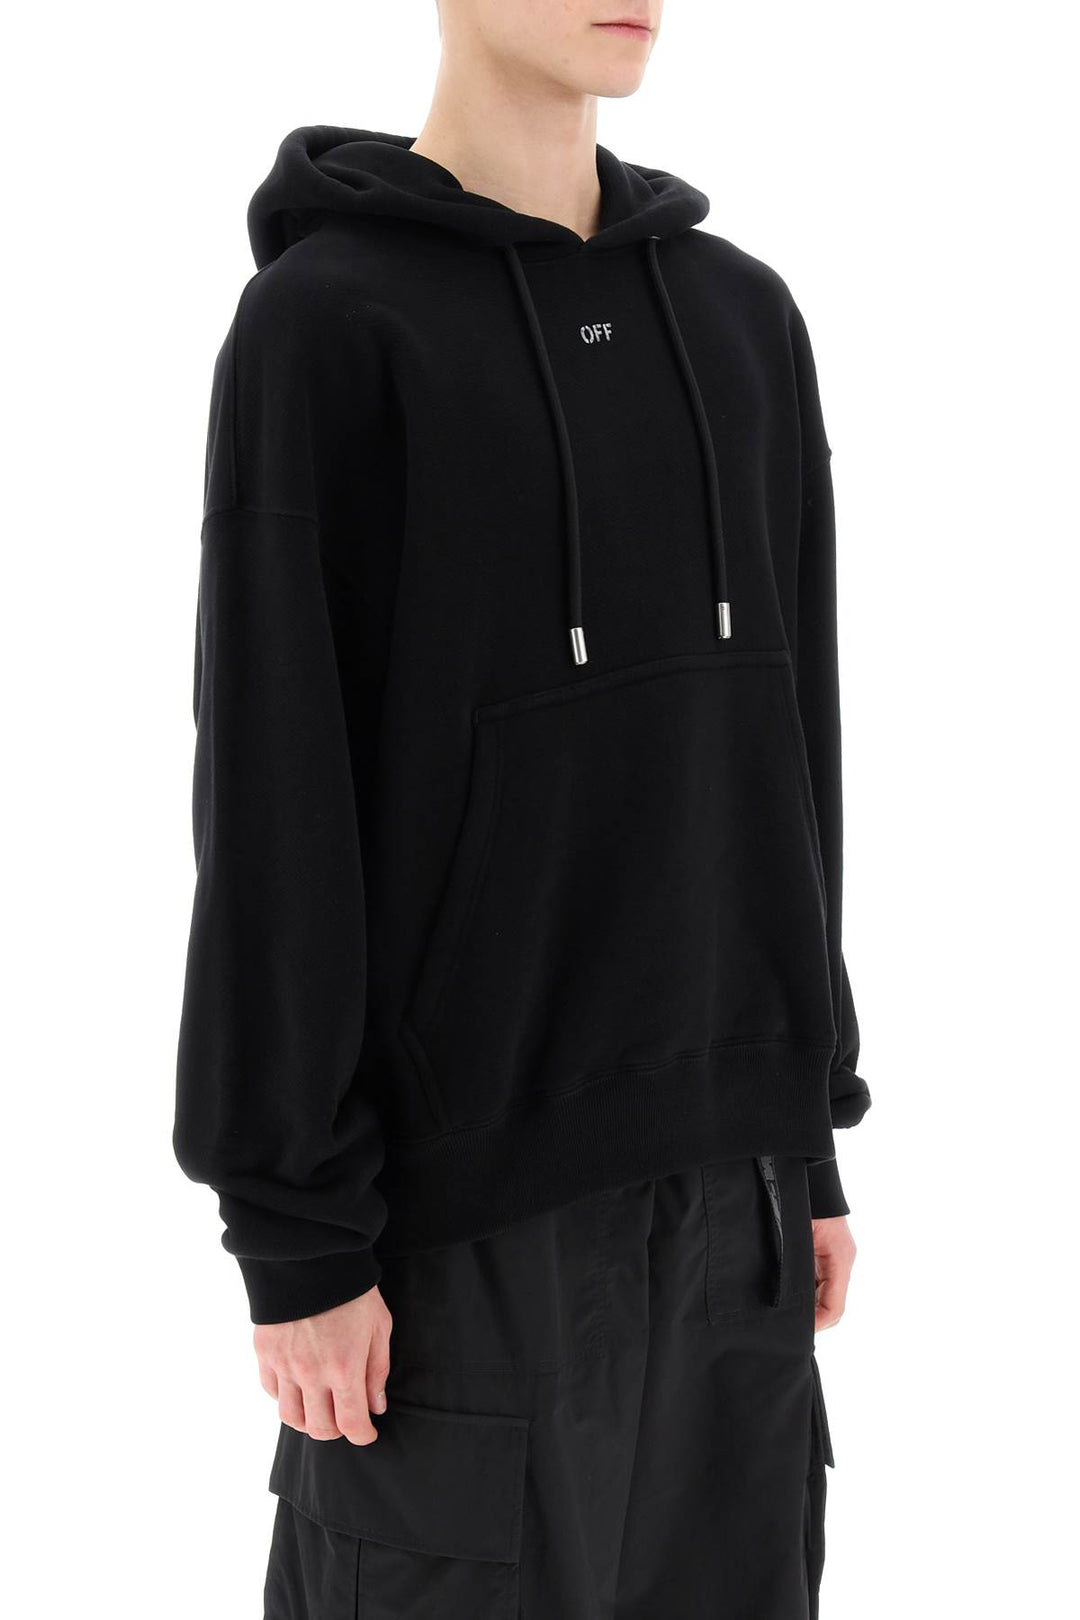 Off White Skate Hoodie With Off Logo   Nero